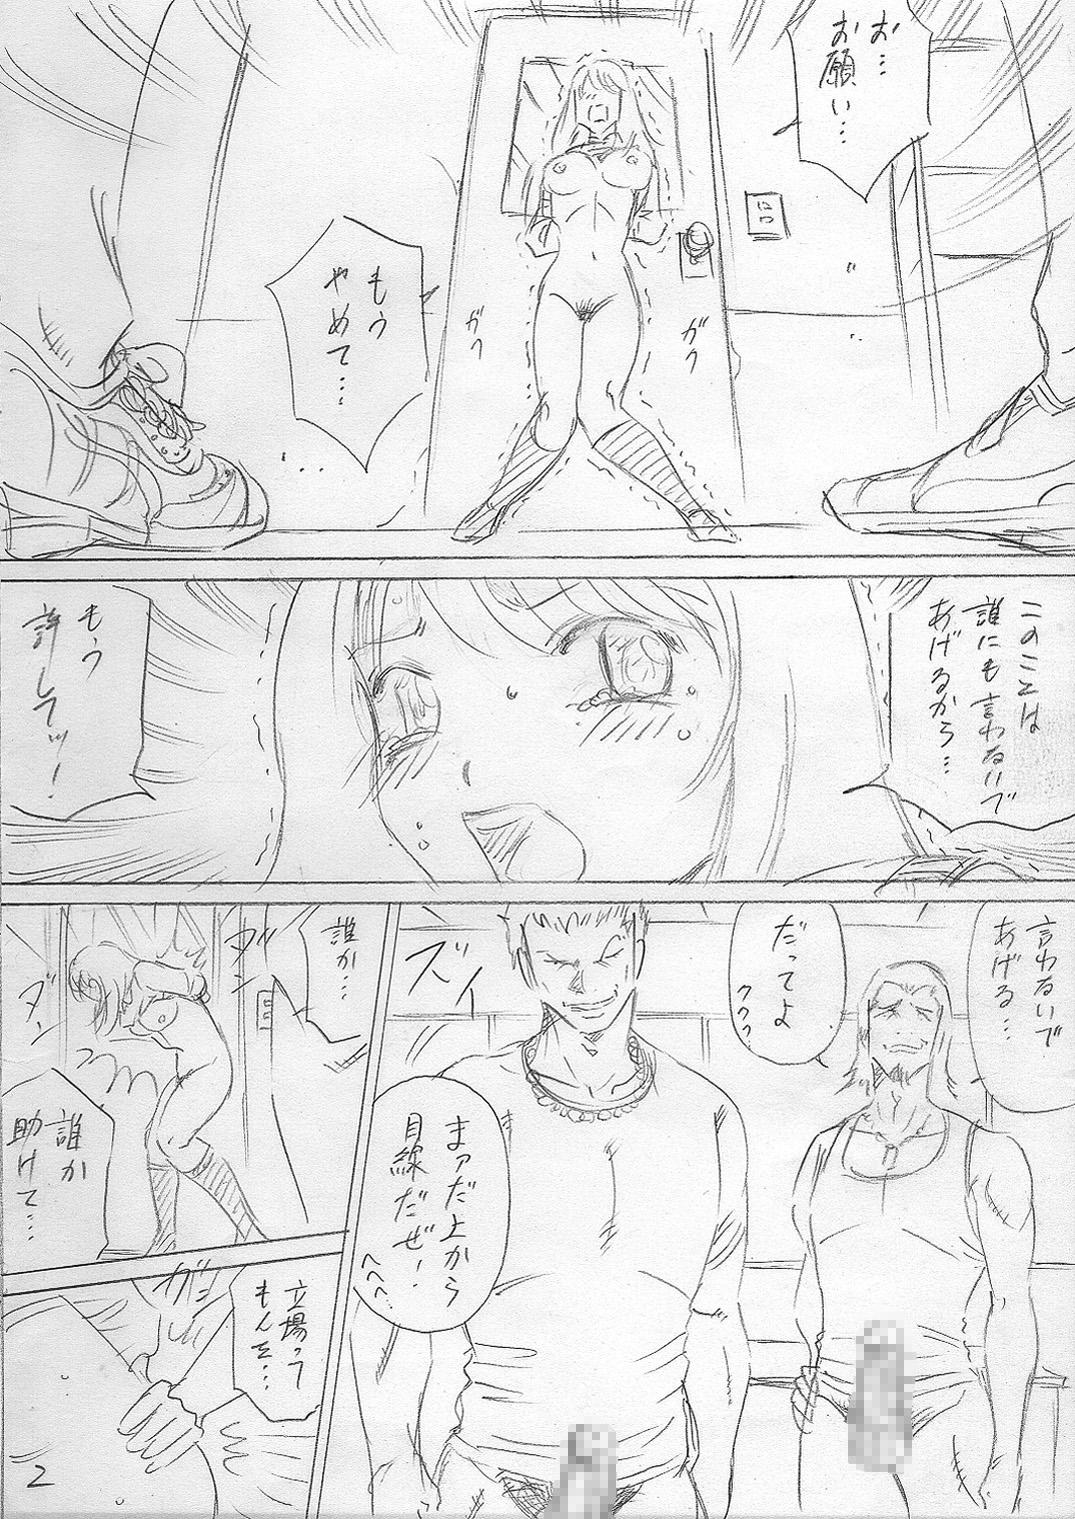 Best Blowjobs 落ちていく日（後編） Tiny Tits - Page 2